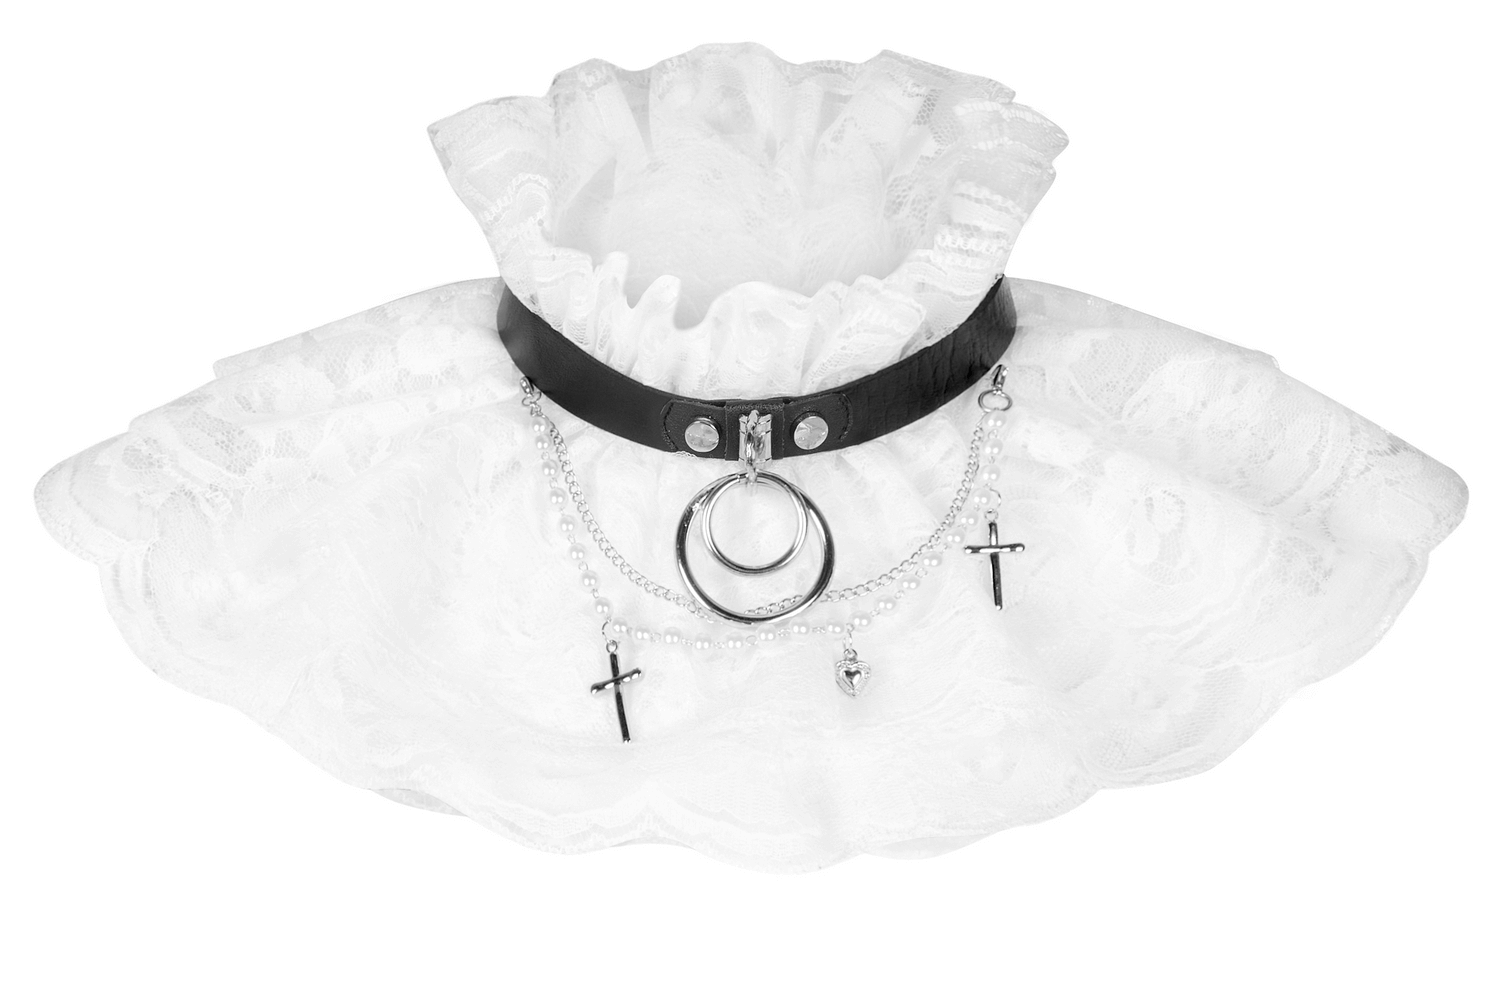 Women's Black Leather Choker with White Lace Collar